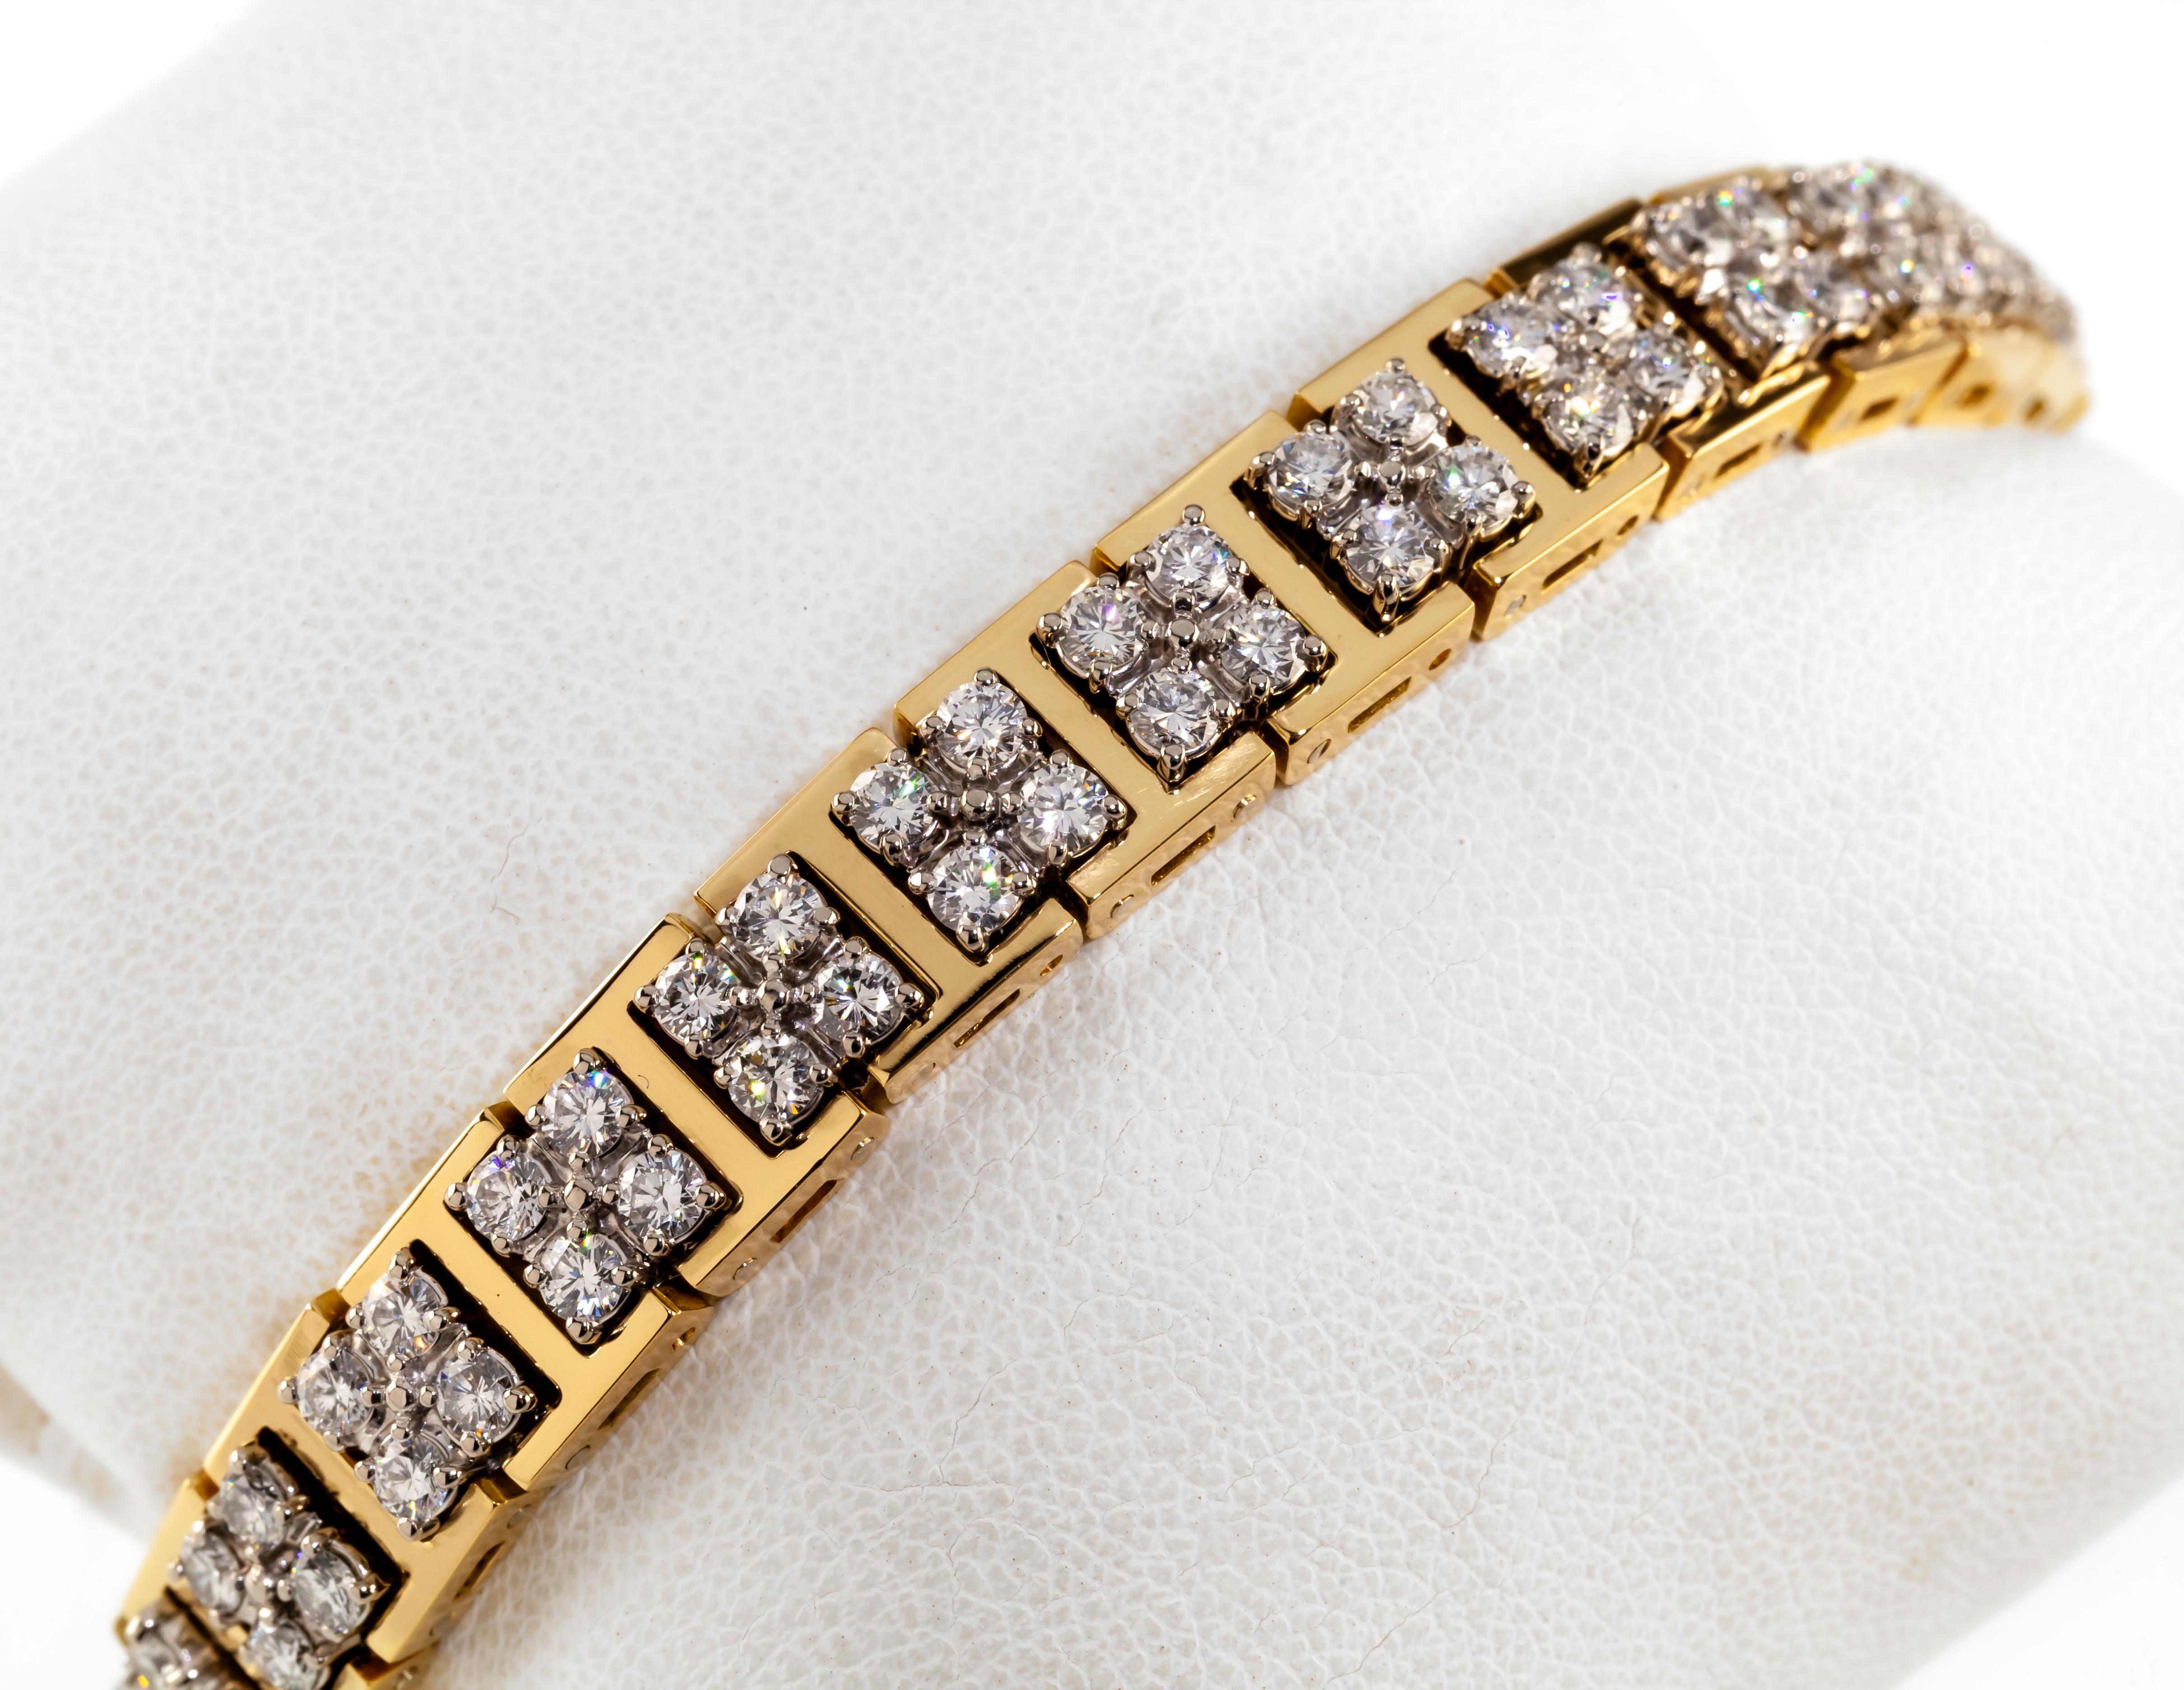 Gorgeous Vintage Jabel Add-A-Link Bracelet
Features 14 Four-Diamond Stations set in 18k Yellow/White Gold
Each Stone Appx 0.10 ct
Total Carat Weight = Appx 5.6 Ct
Average Color = F or better
Average Clarity = VS or Better
Total Length of Bracelet =